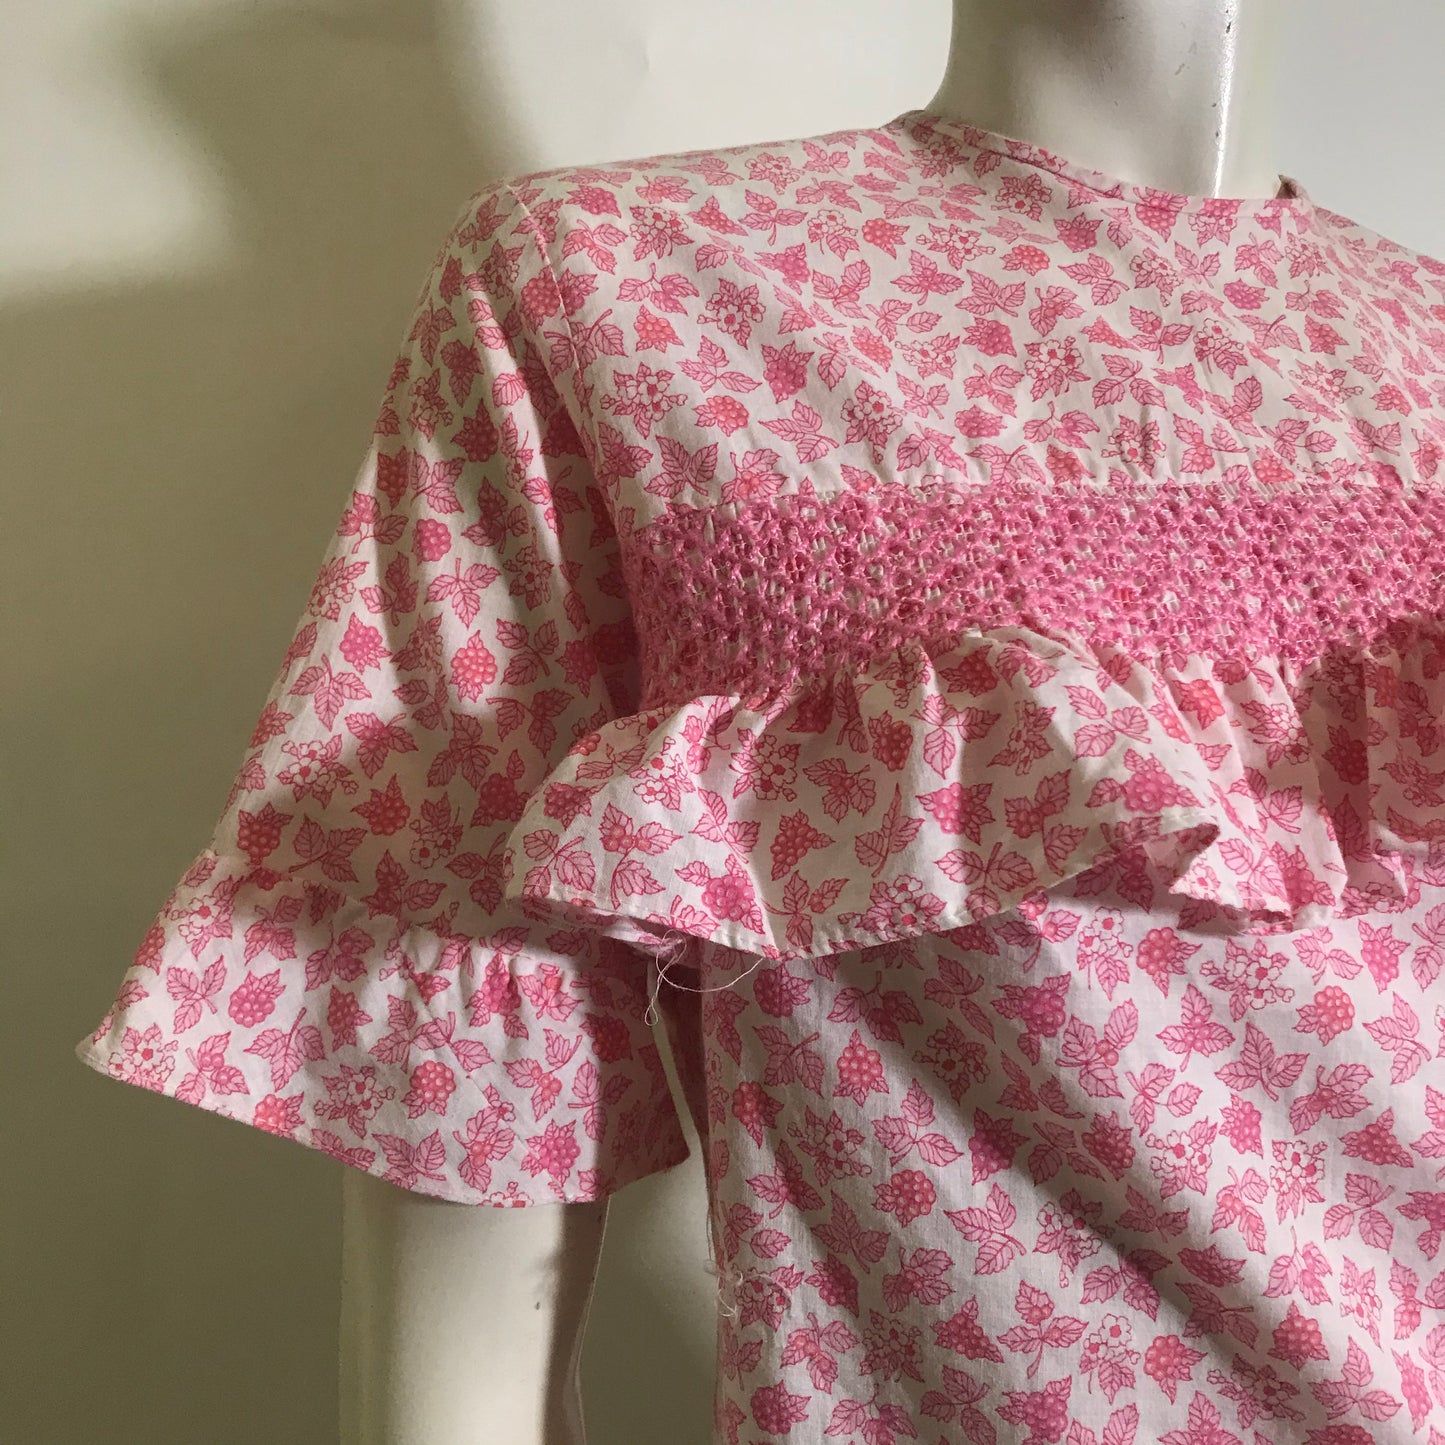 Ruffled Smocked Bodice Pink Floral Print Blouse circa 1960s